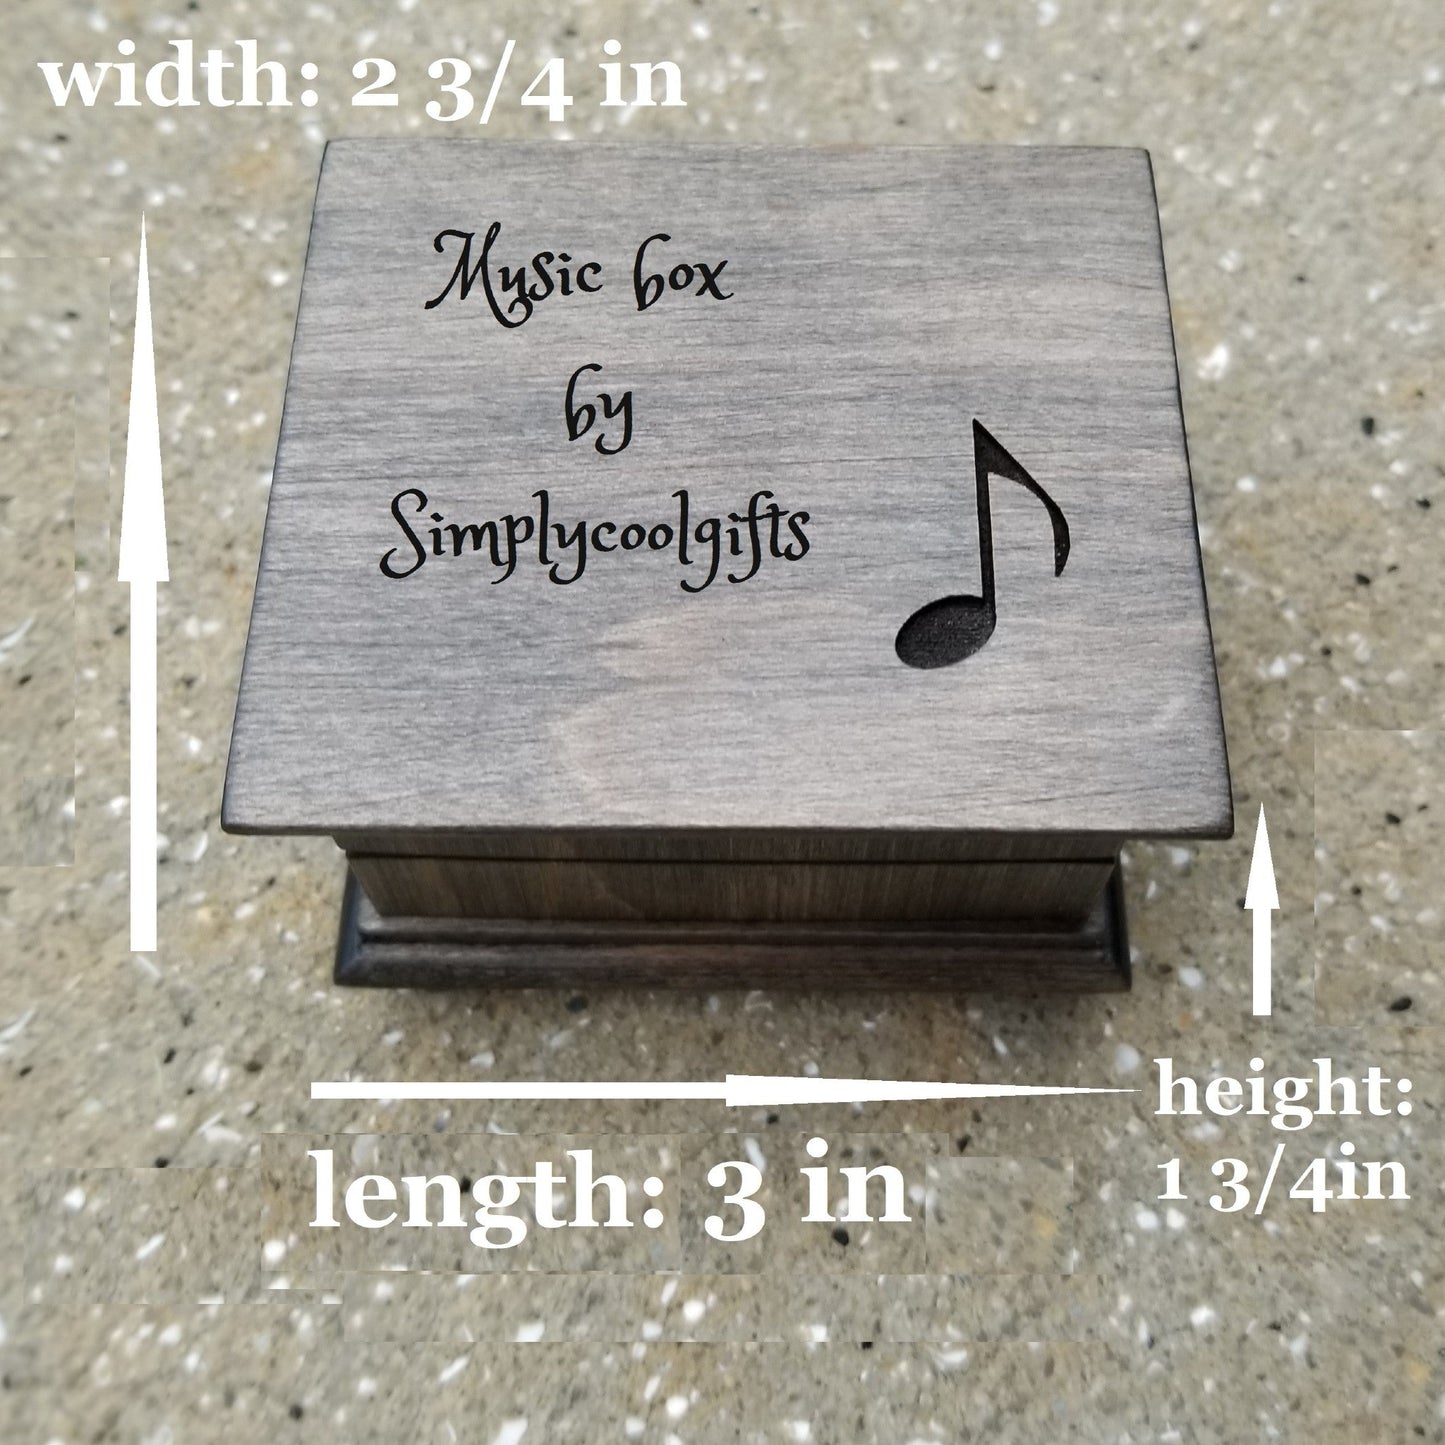 music box sizing info at Simplycoolgift